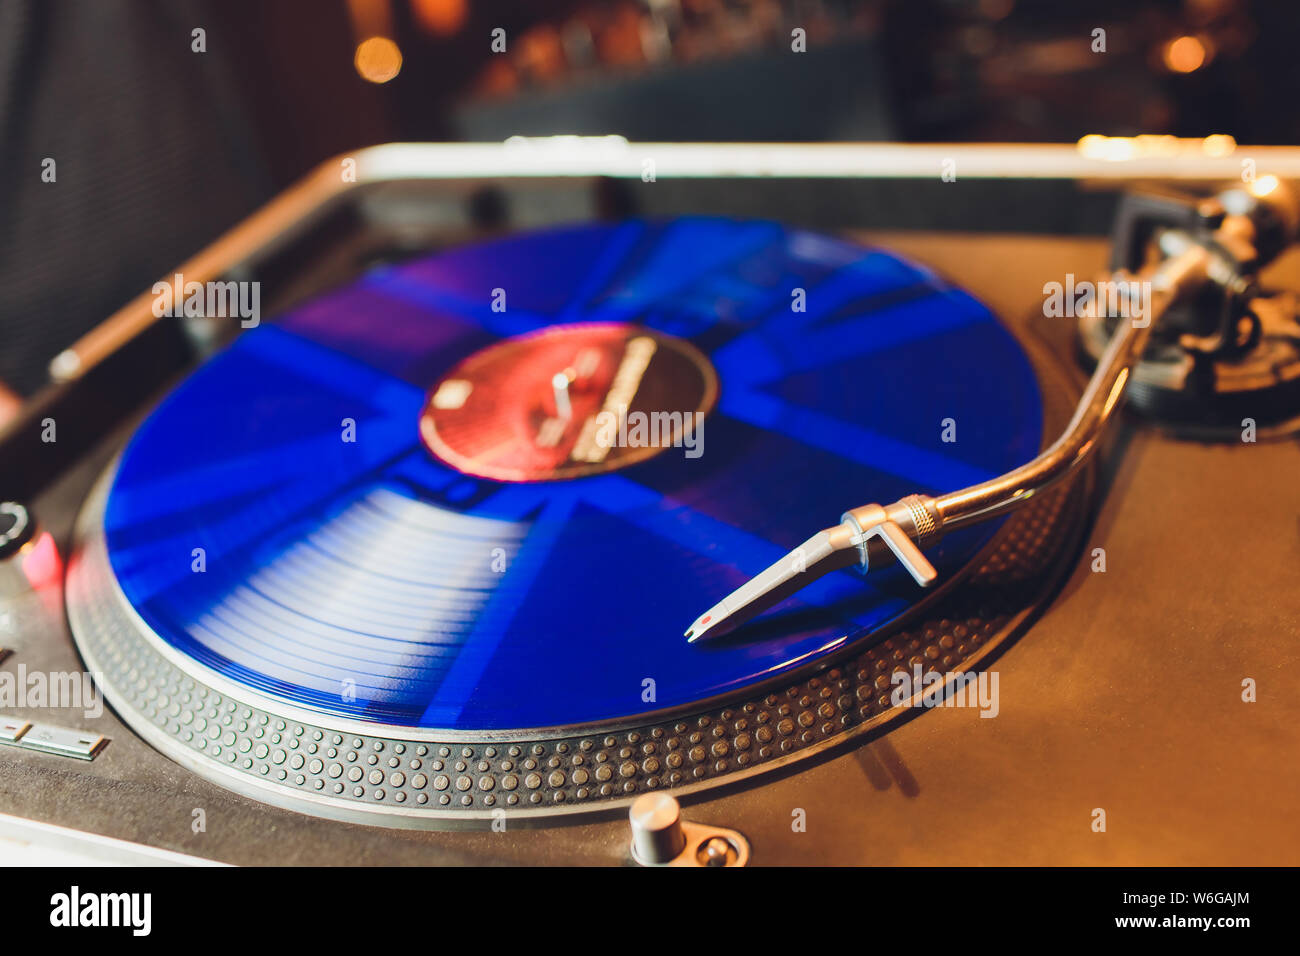 Turntable Vinyl Record Player Sound Technology For Dj To Mix Play Music Vintage Vinyl Record Player On A Background Decorations For A Party Bright Stock Photo Alamy